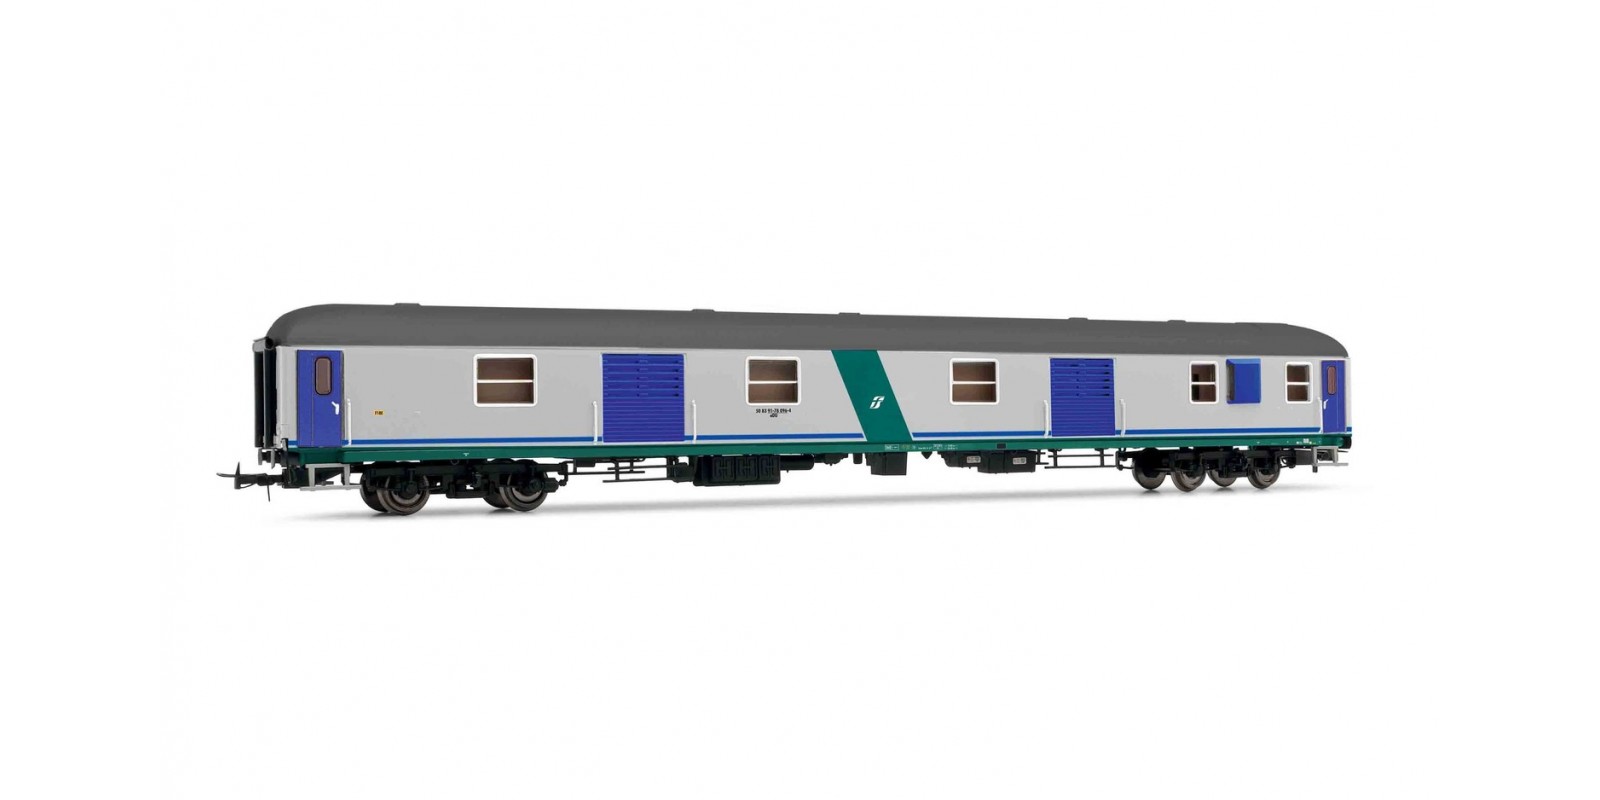 RI4248 Luggage coach X type ‘70T in XMPR livery for “Navetta” shuttle services